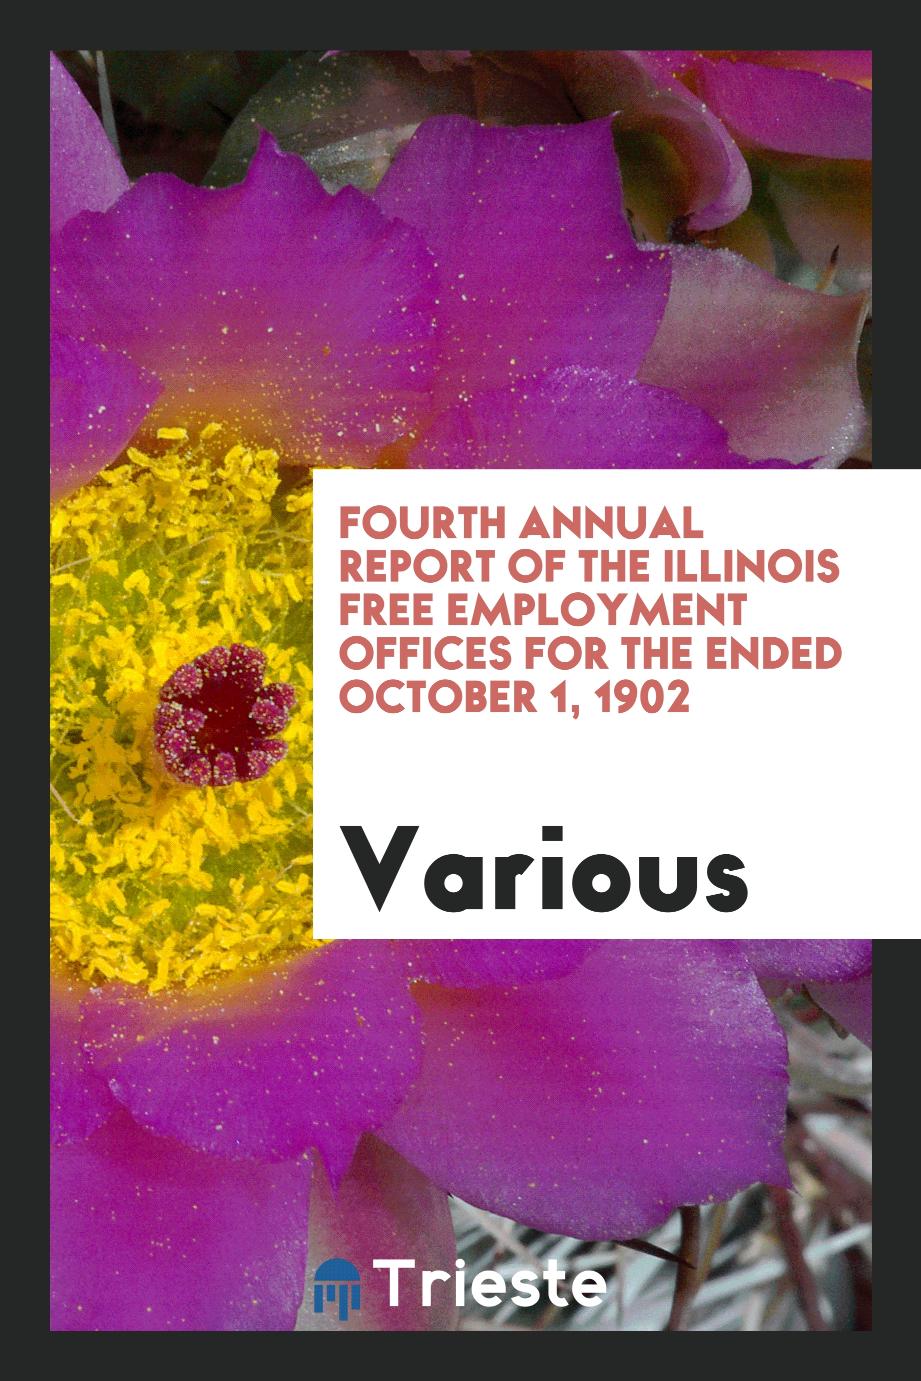 Fourth Annual Report of the Illinois Free Employment Offices for the Ended October 1, 1902